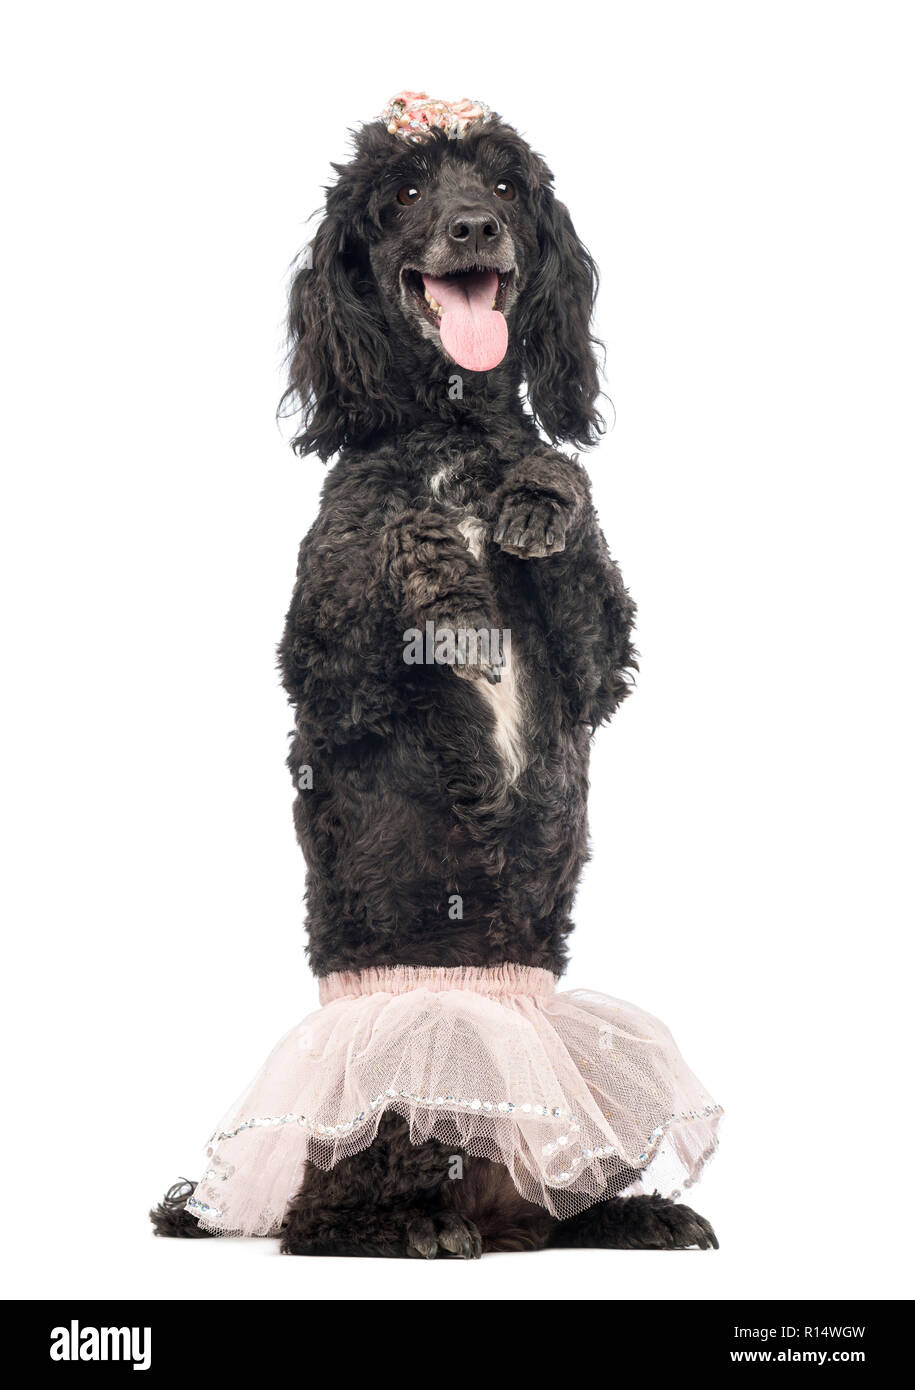 Poodle, 5 years old, standing on hind legs, wearing a pink tutu and panting in front of white background Stock Photo